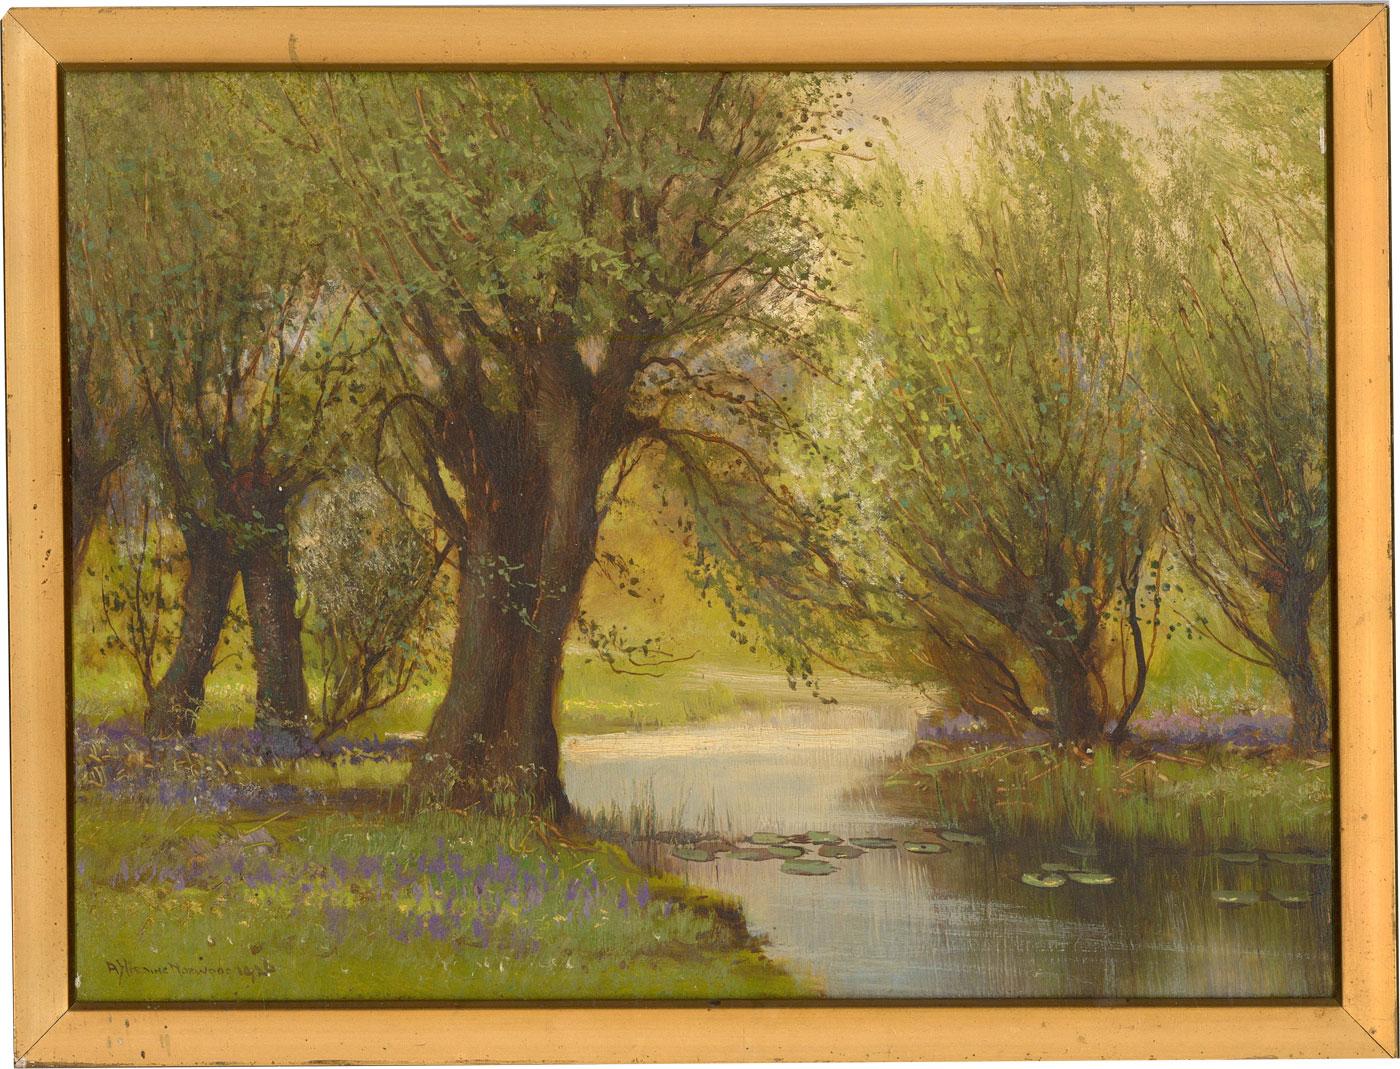 Unknown Landscape Painting - Arthur Harding Norwood (fl.1889-1893) - 1926 Oil, River at Dawn